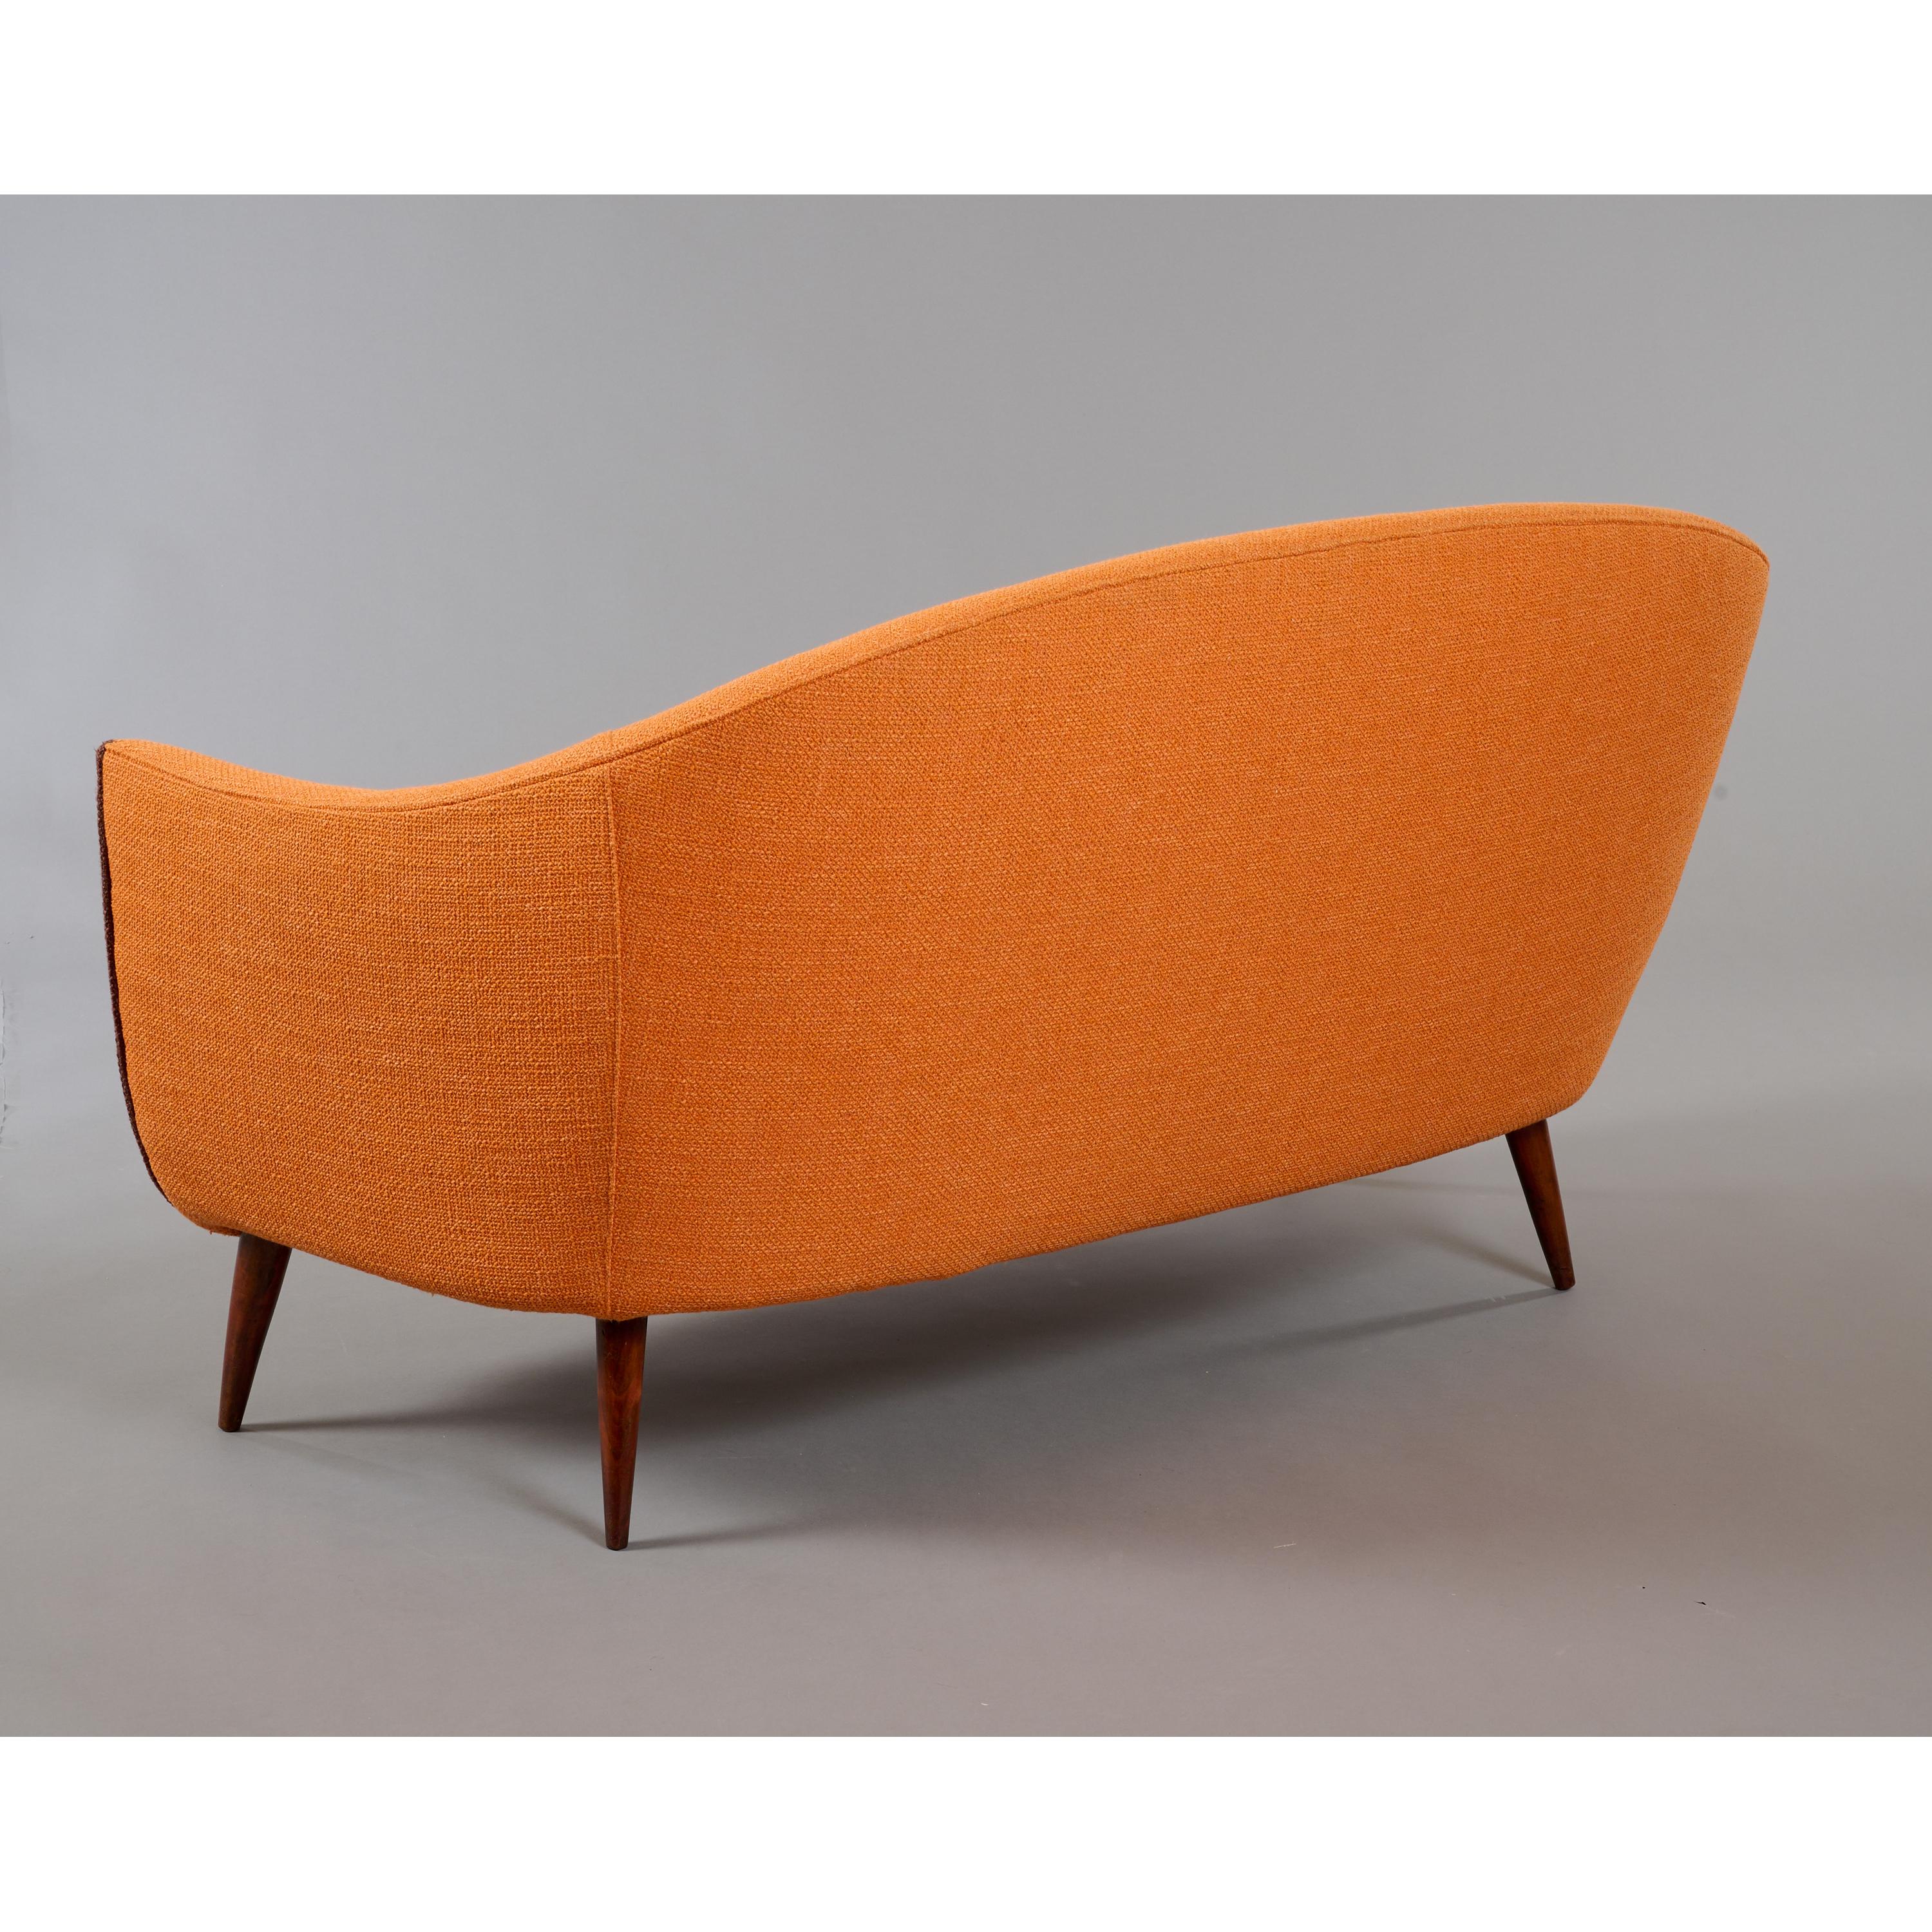 Curved ITSO Federico Munari Settee in Wood with Orange Upholstery, Italy 1950s  For Sale 1